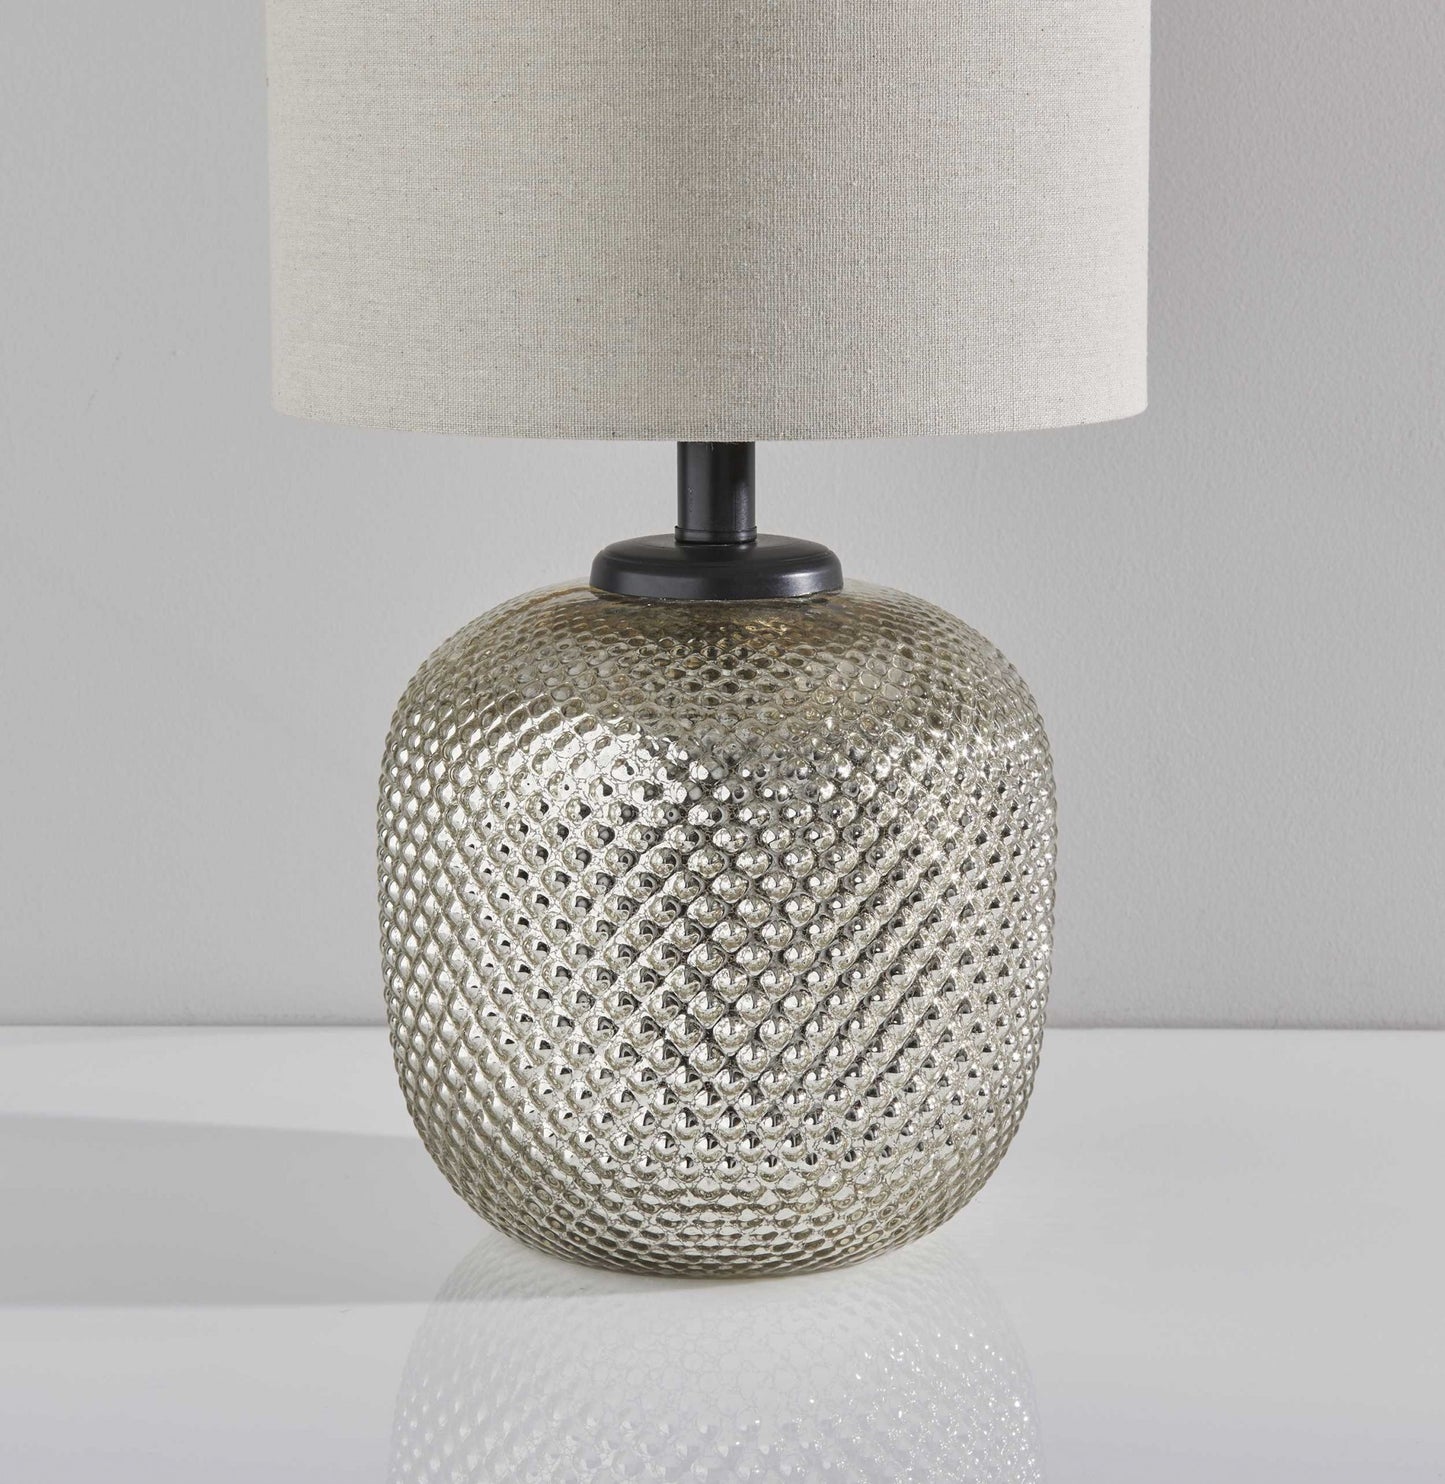 A|M Lighting Bronze Metal Dotty Table Lamp With Night Light